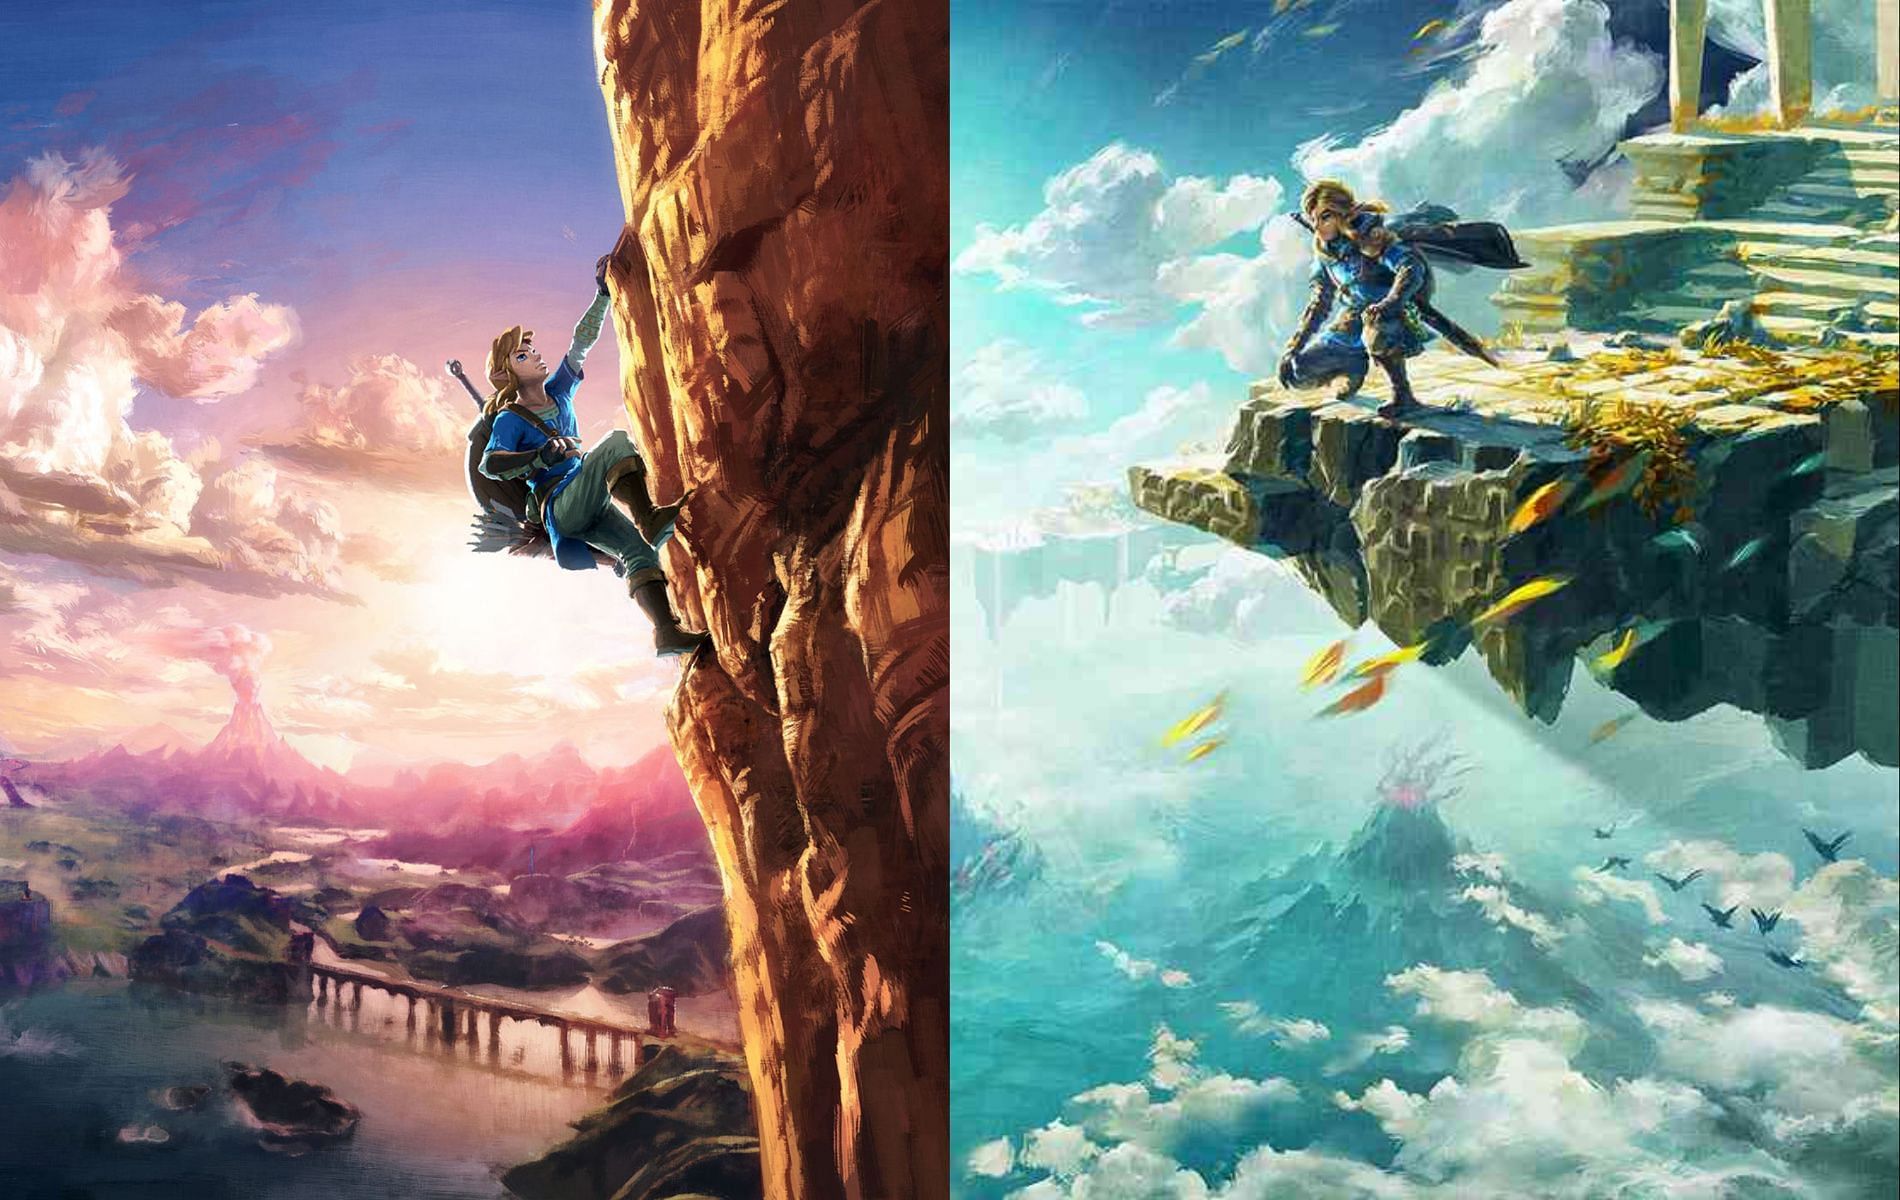 The Legend of Zelda series has undergone a revolution with the latest two entries (Images via Nintendo)